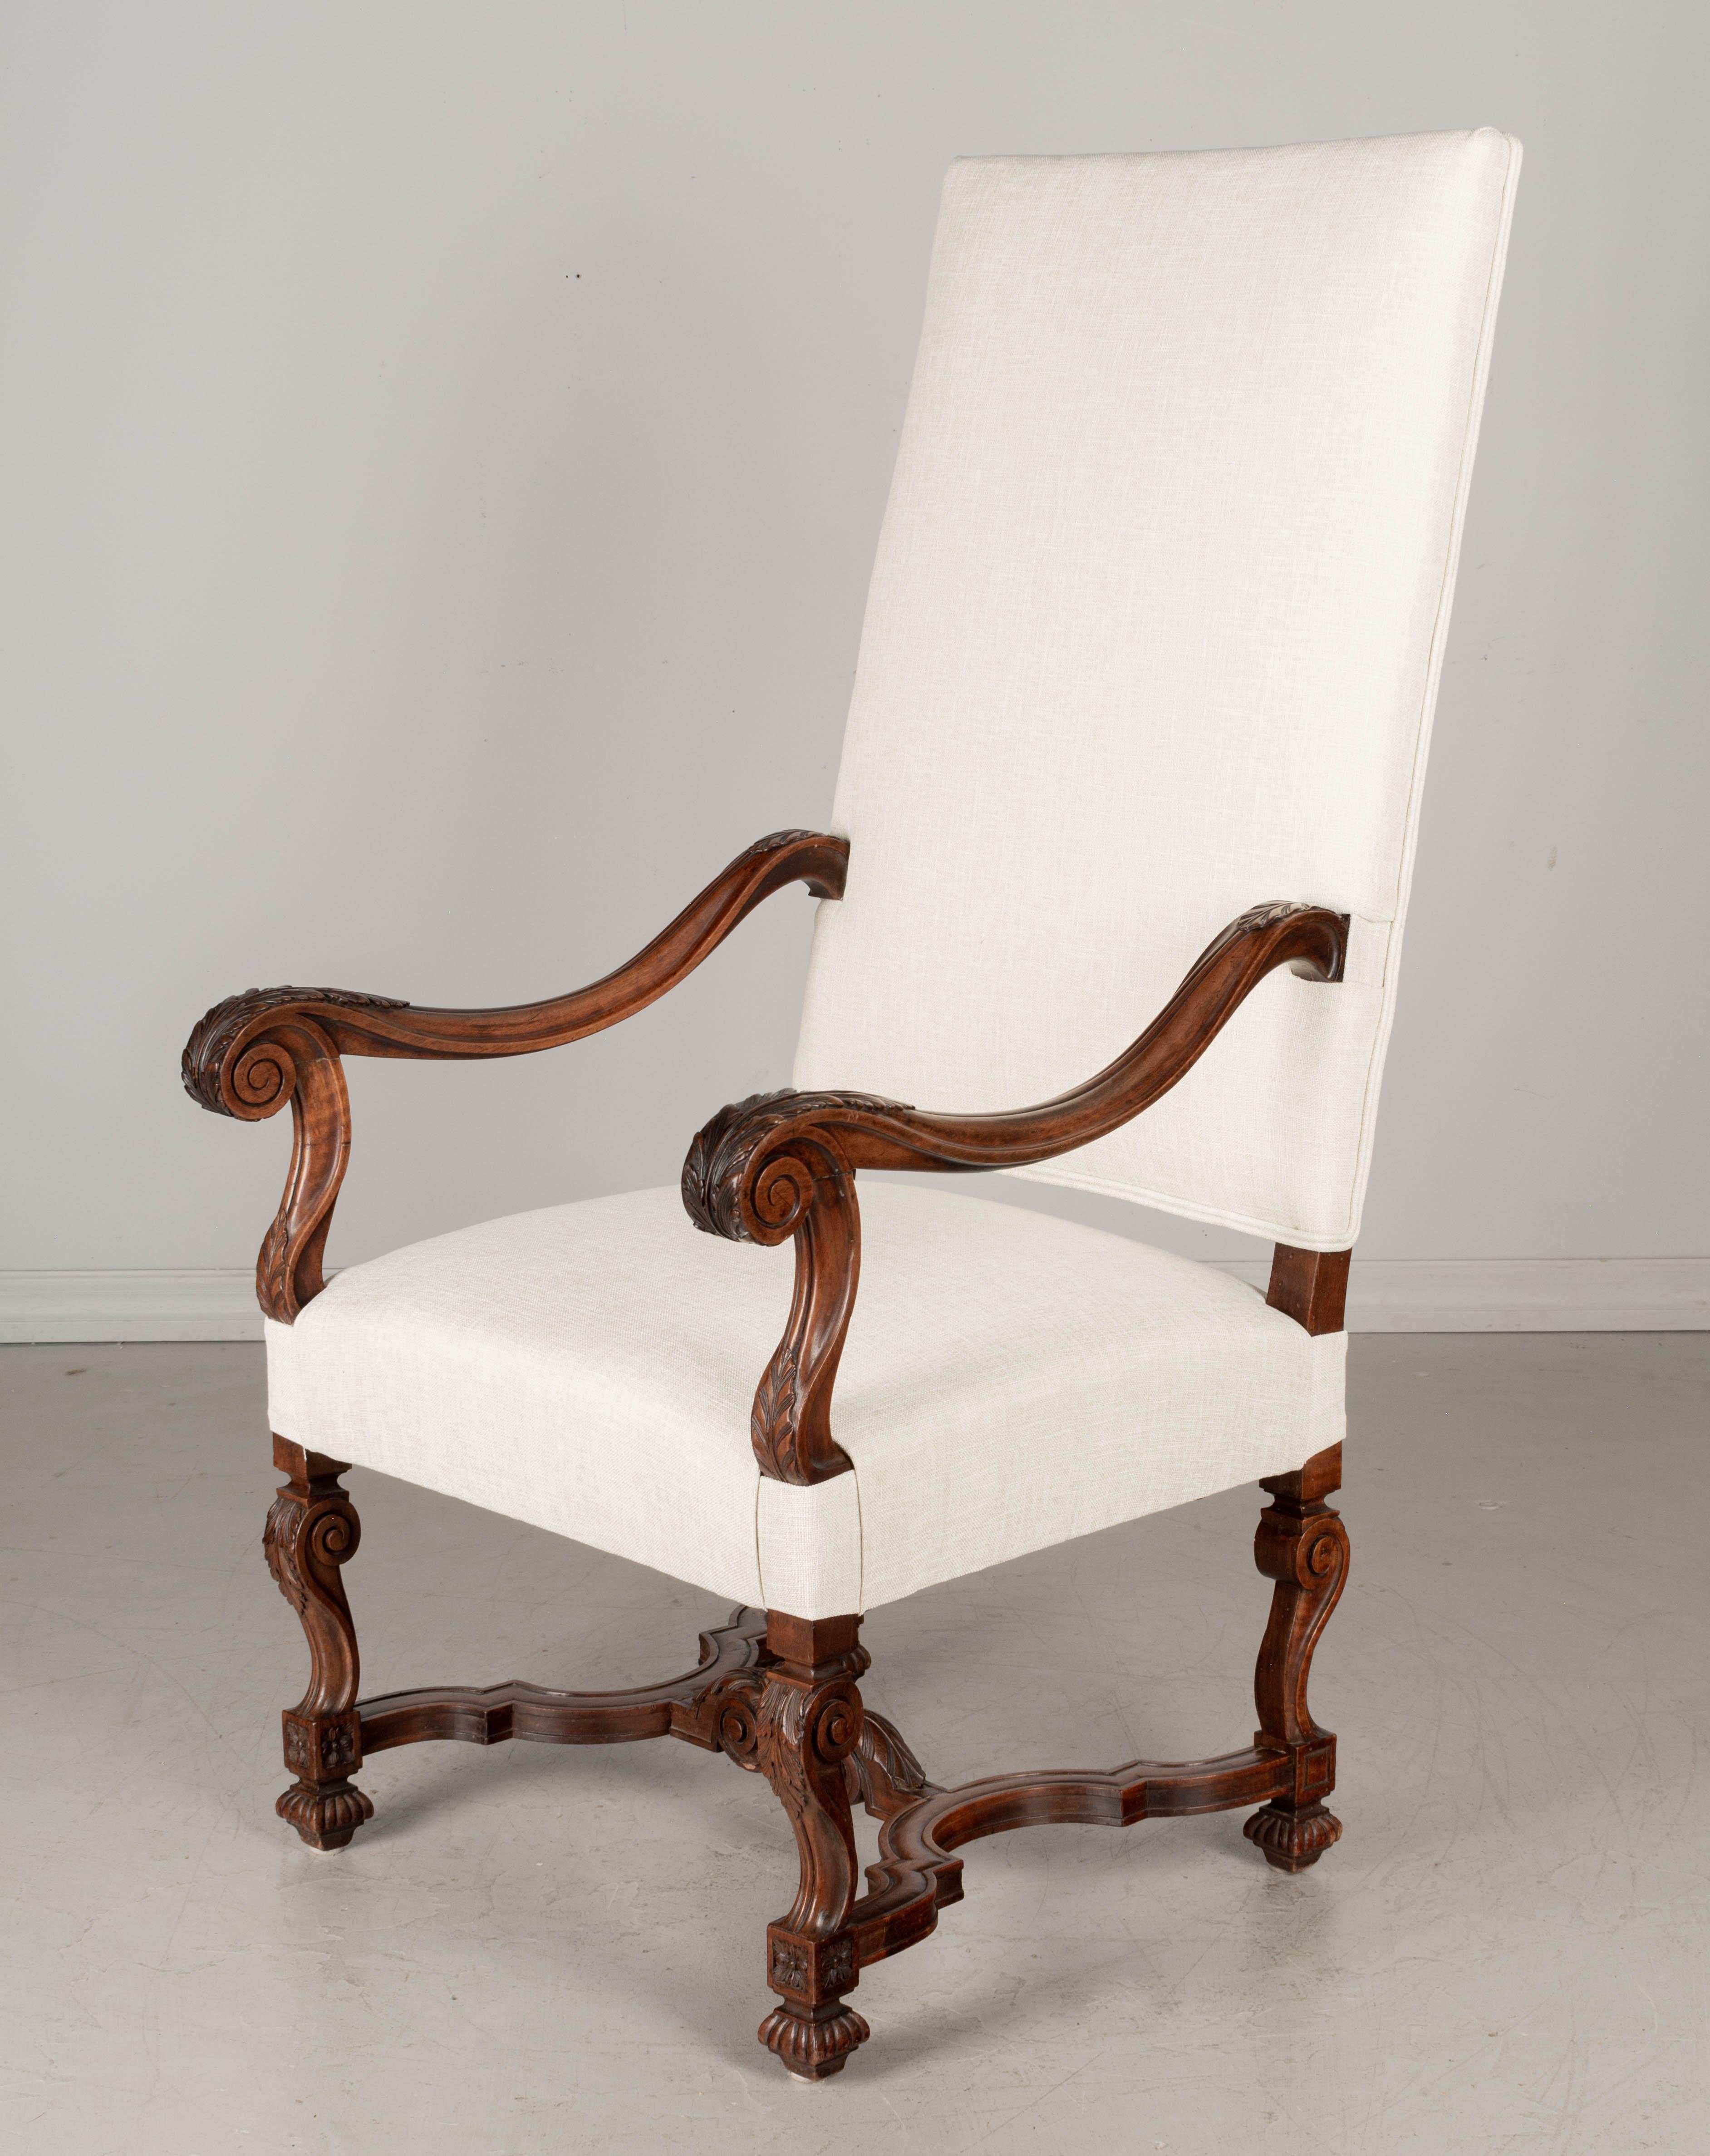 19th Century Louis XIII Style Fauteuil or Armchair In Good Condition For Sale In Winter Park, FL